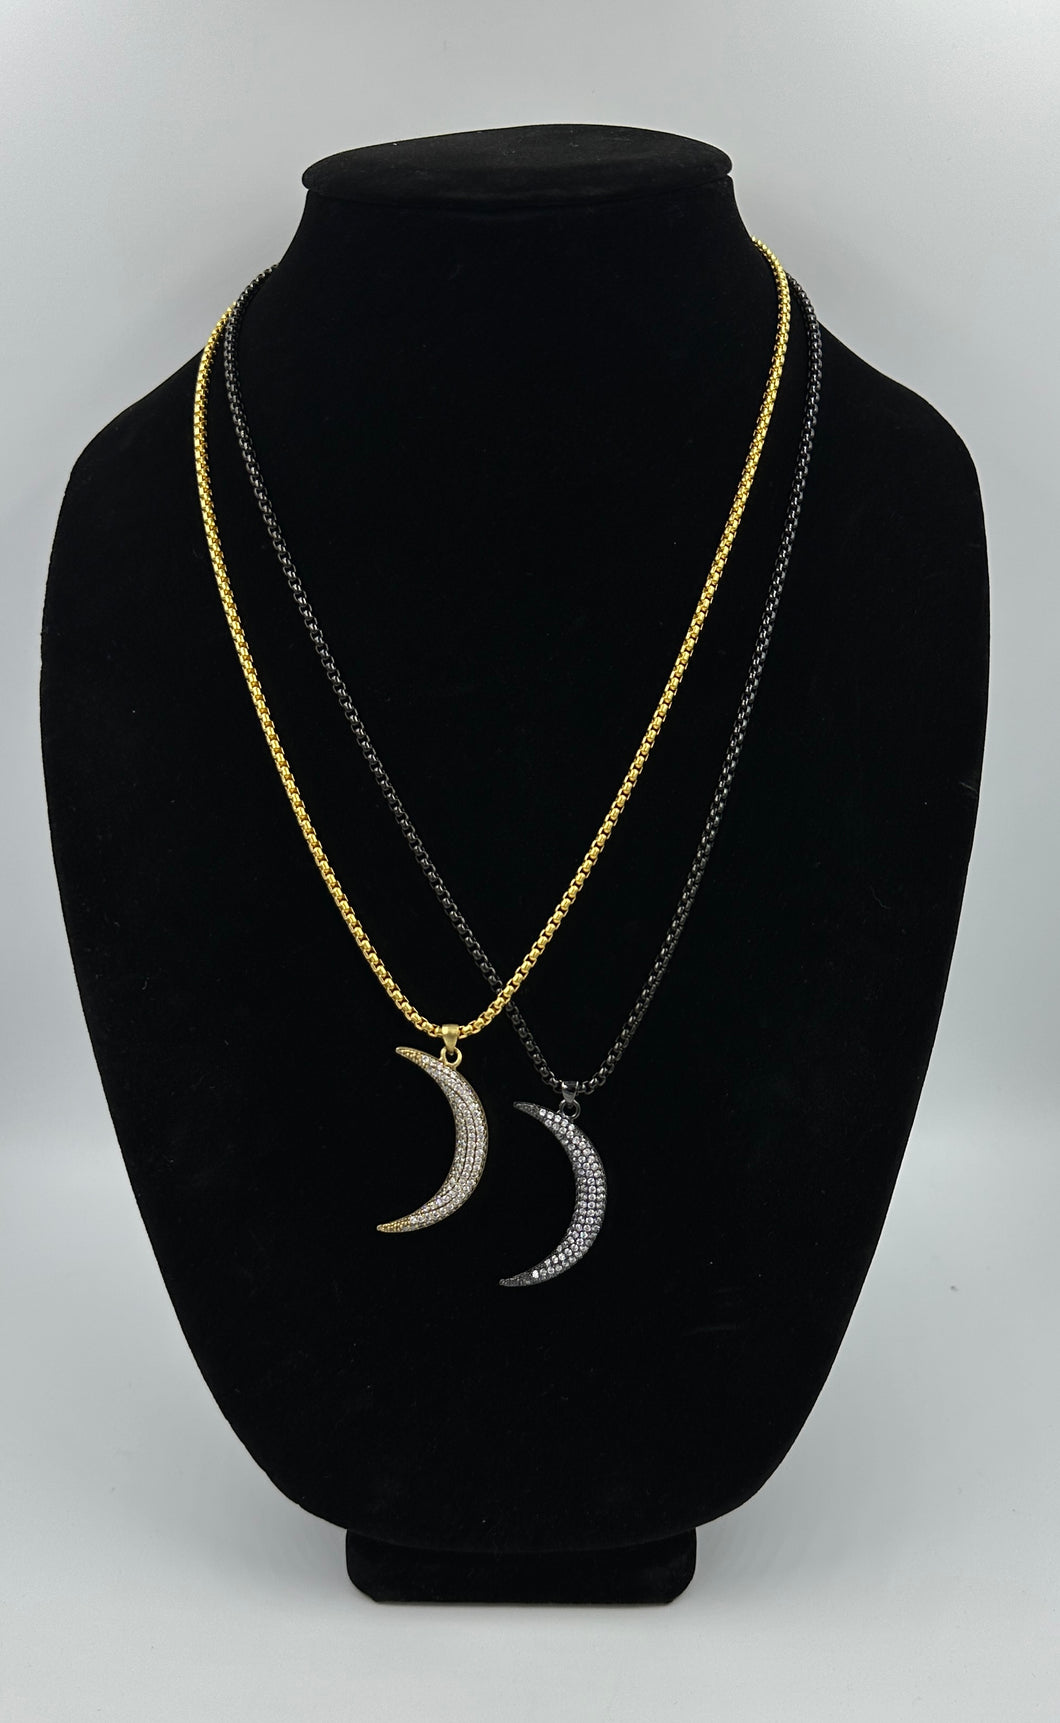 The Moon on a String Necklace